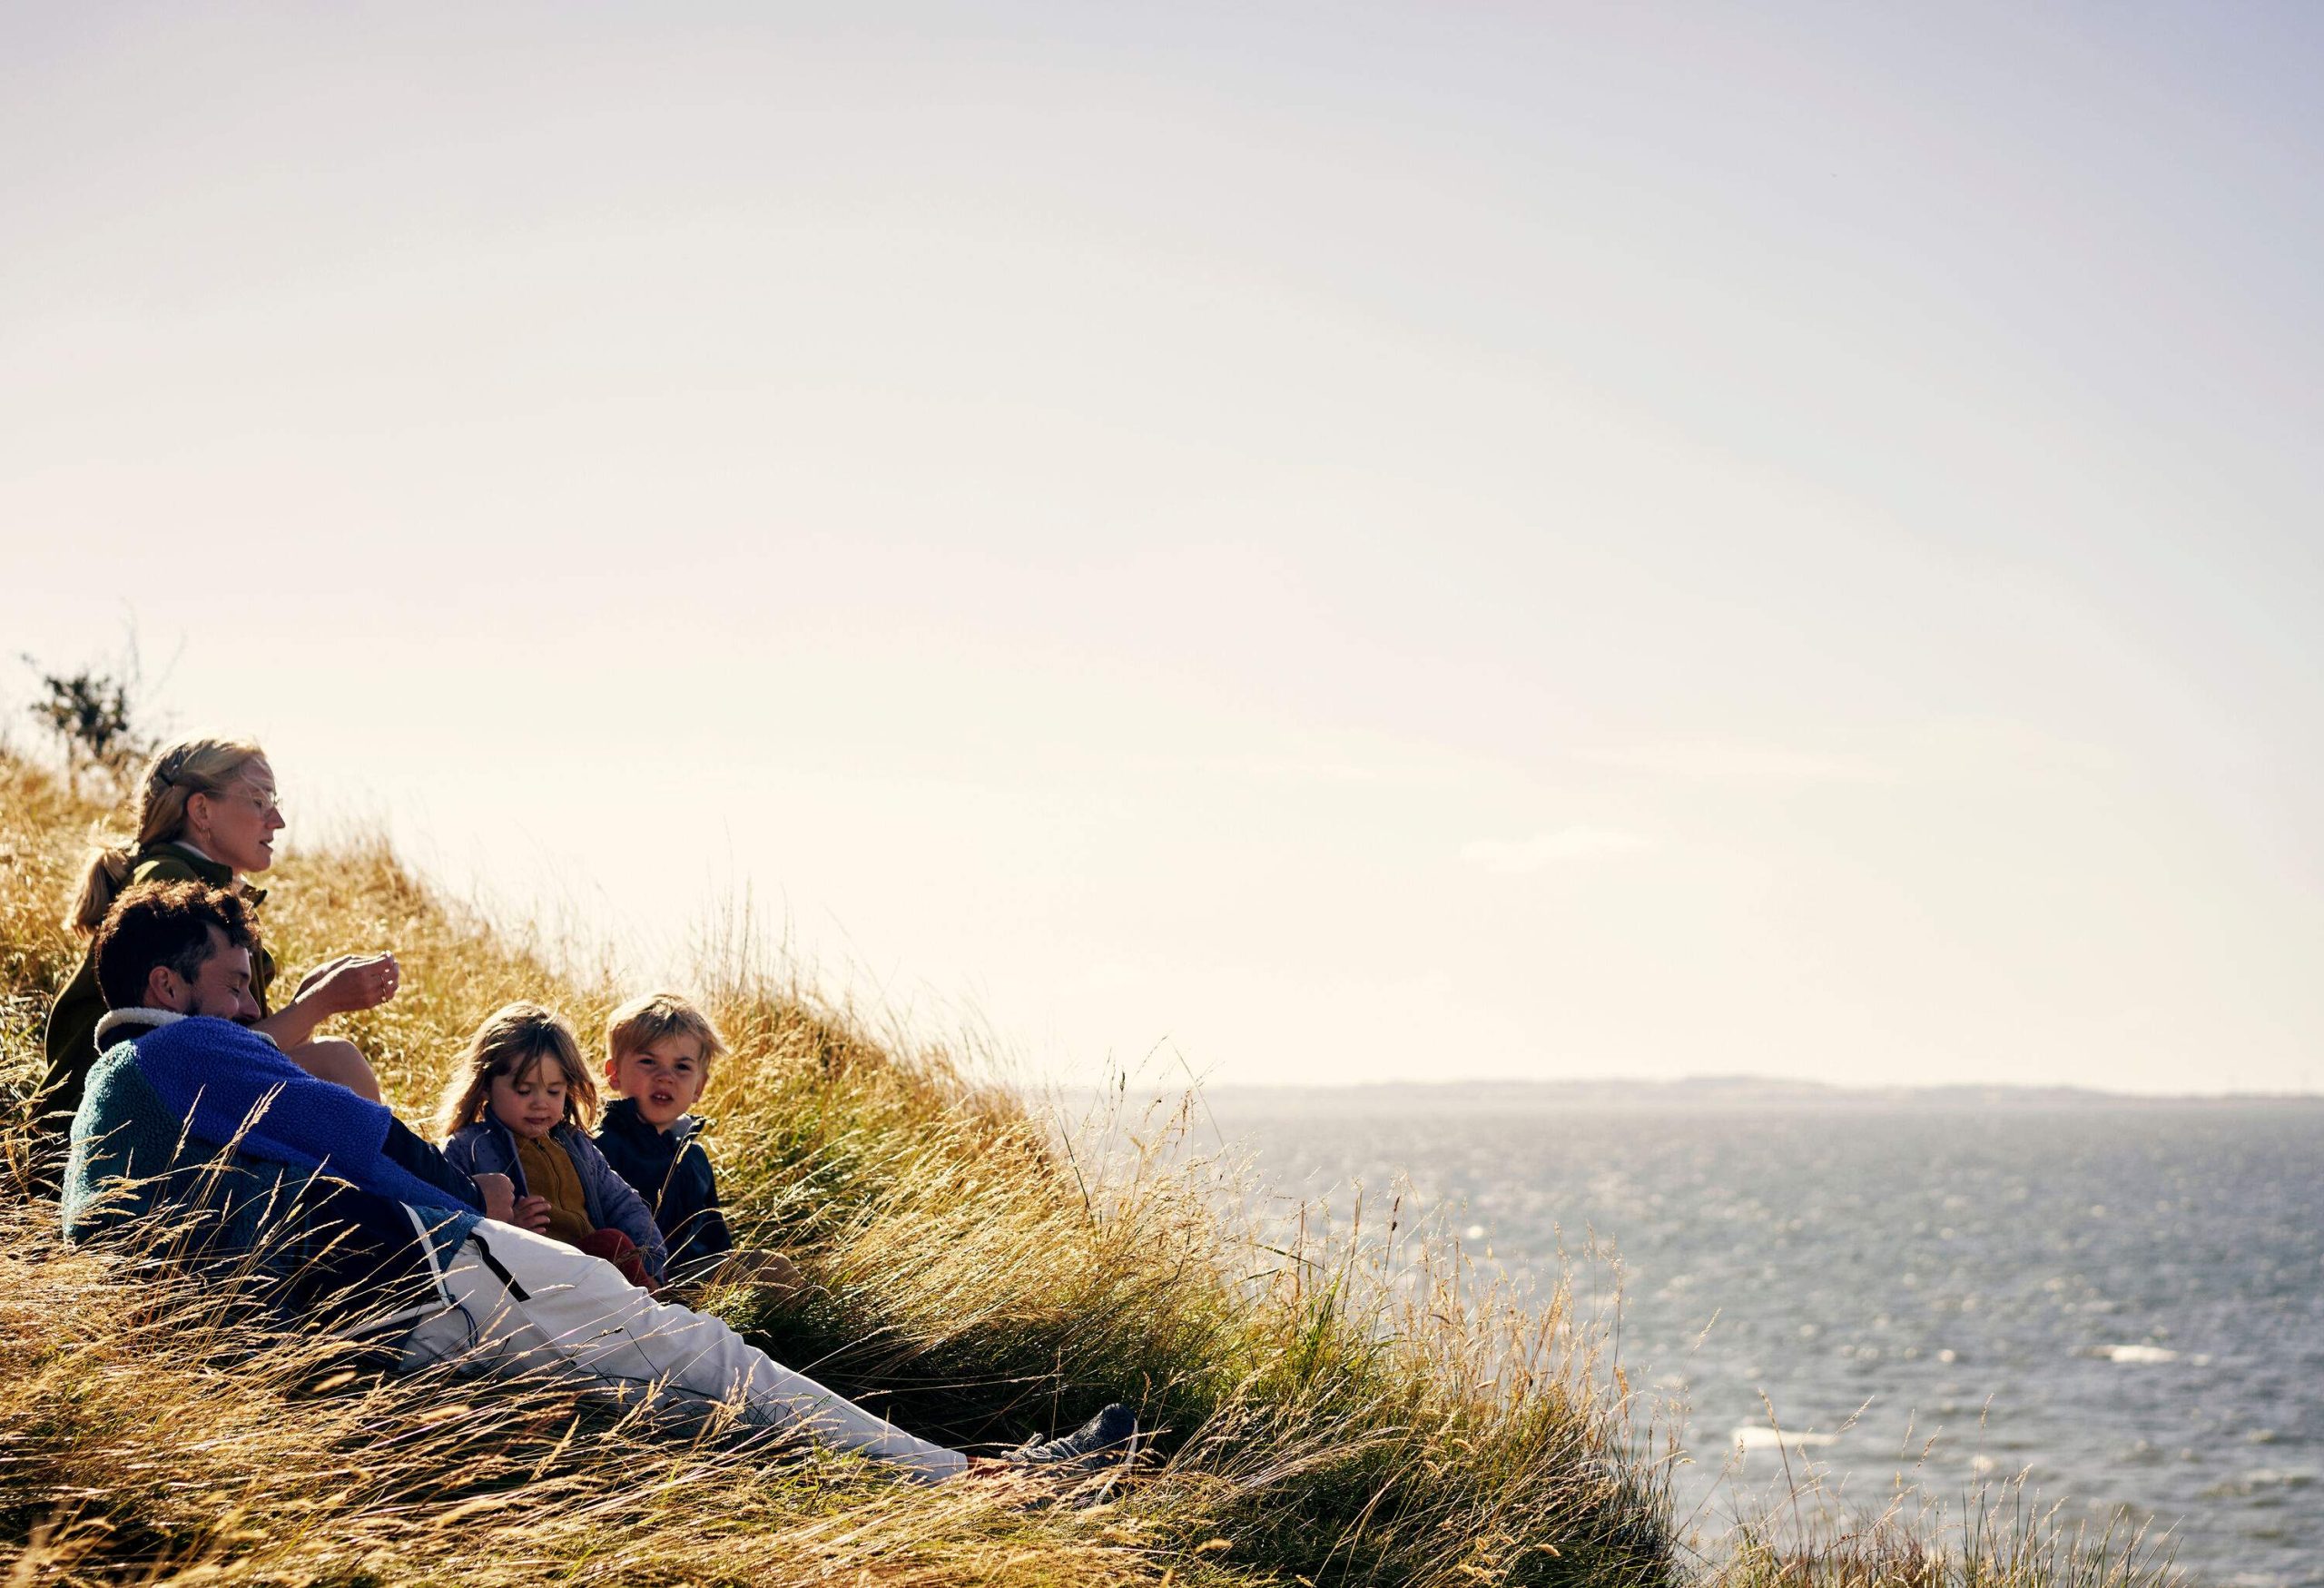 A family sitting in a field of tall grass on a hill overlooking the sea.